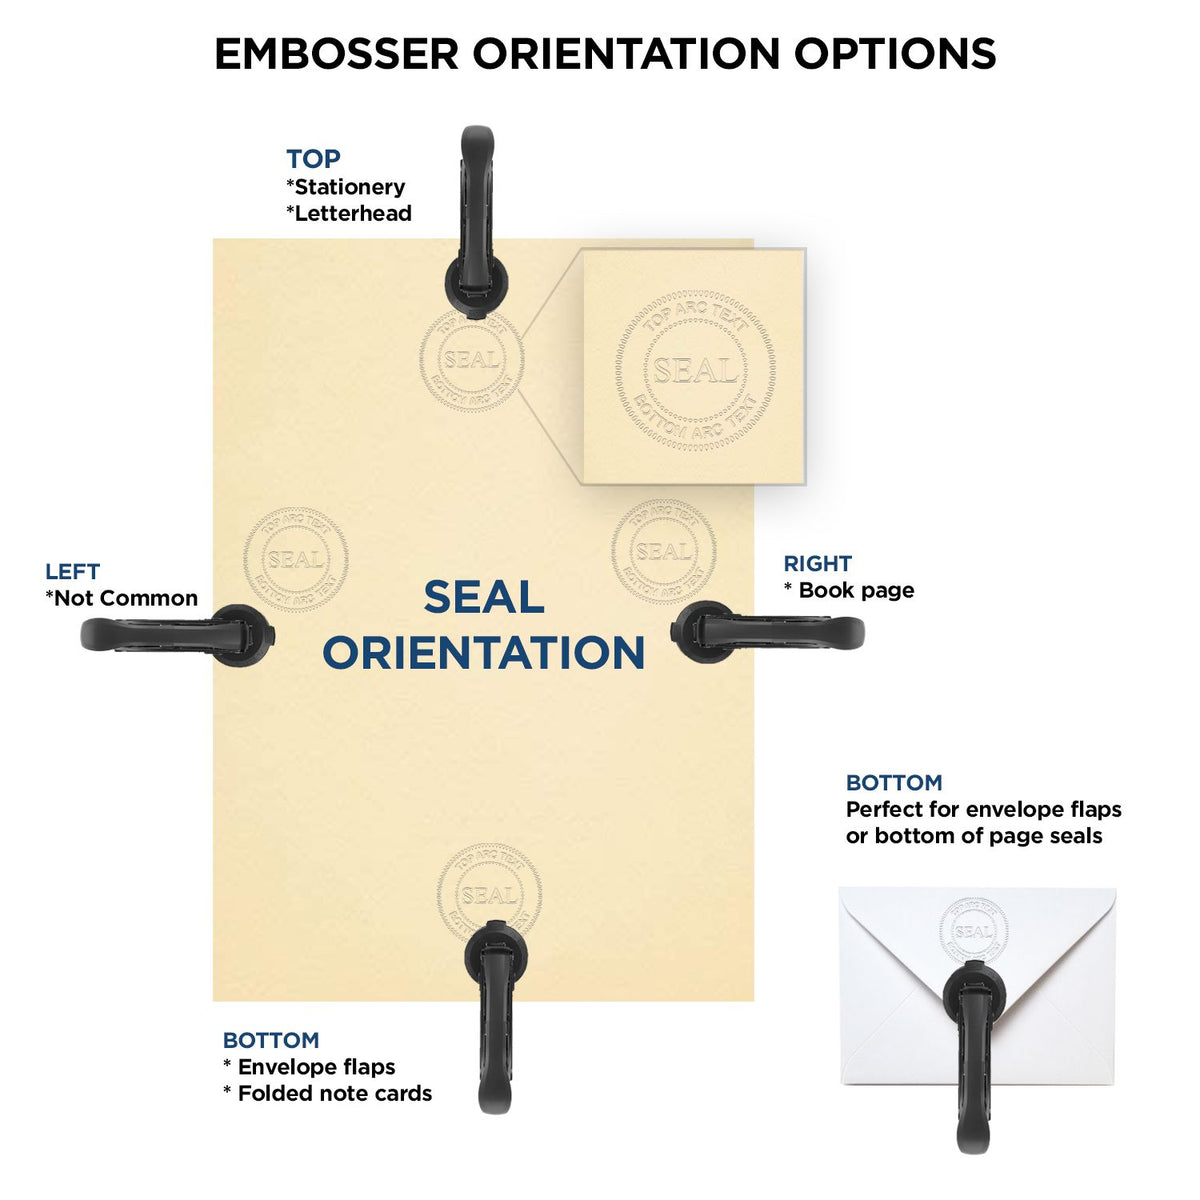 An infographic for the Gift New Jersey Architect Seal showing embosser orientation, this is showing examples of a top, bottom, right and left insert.